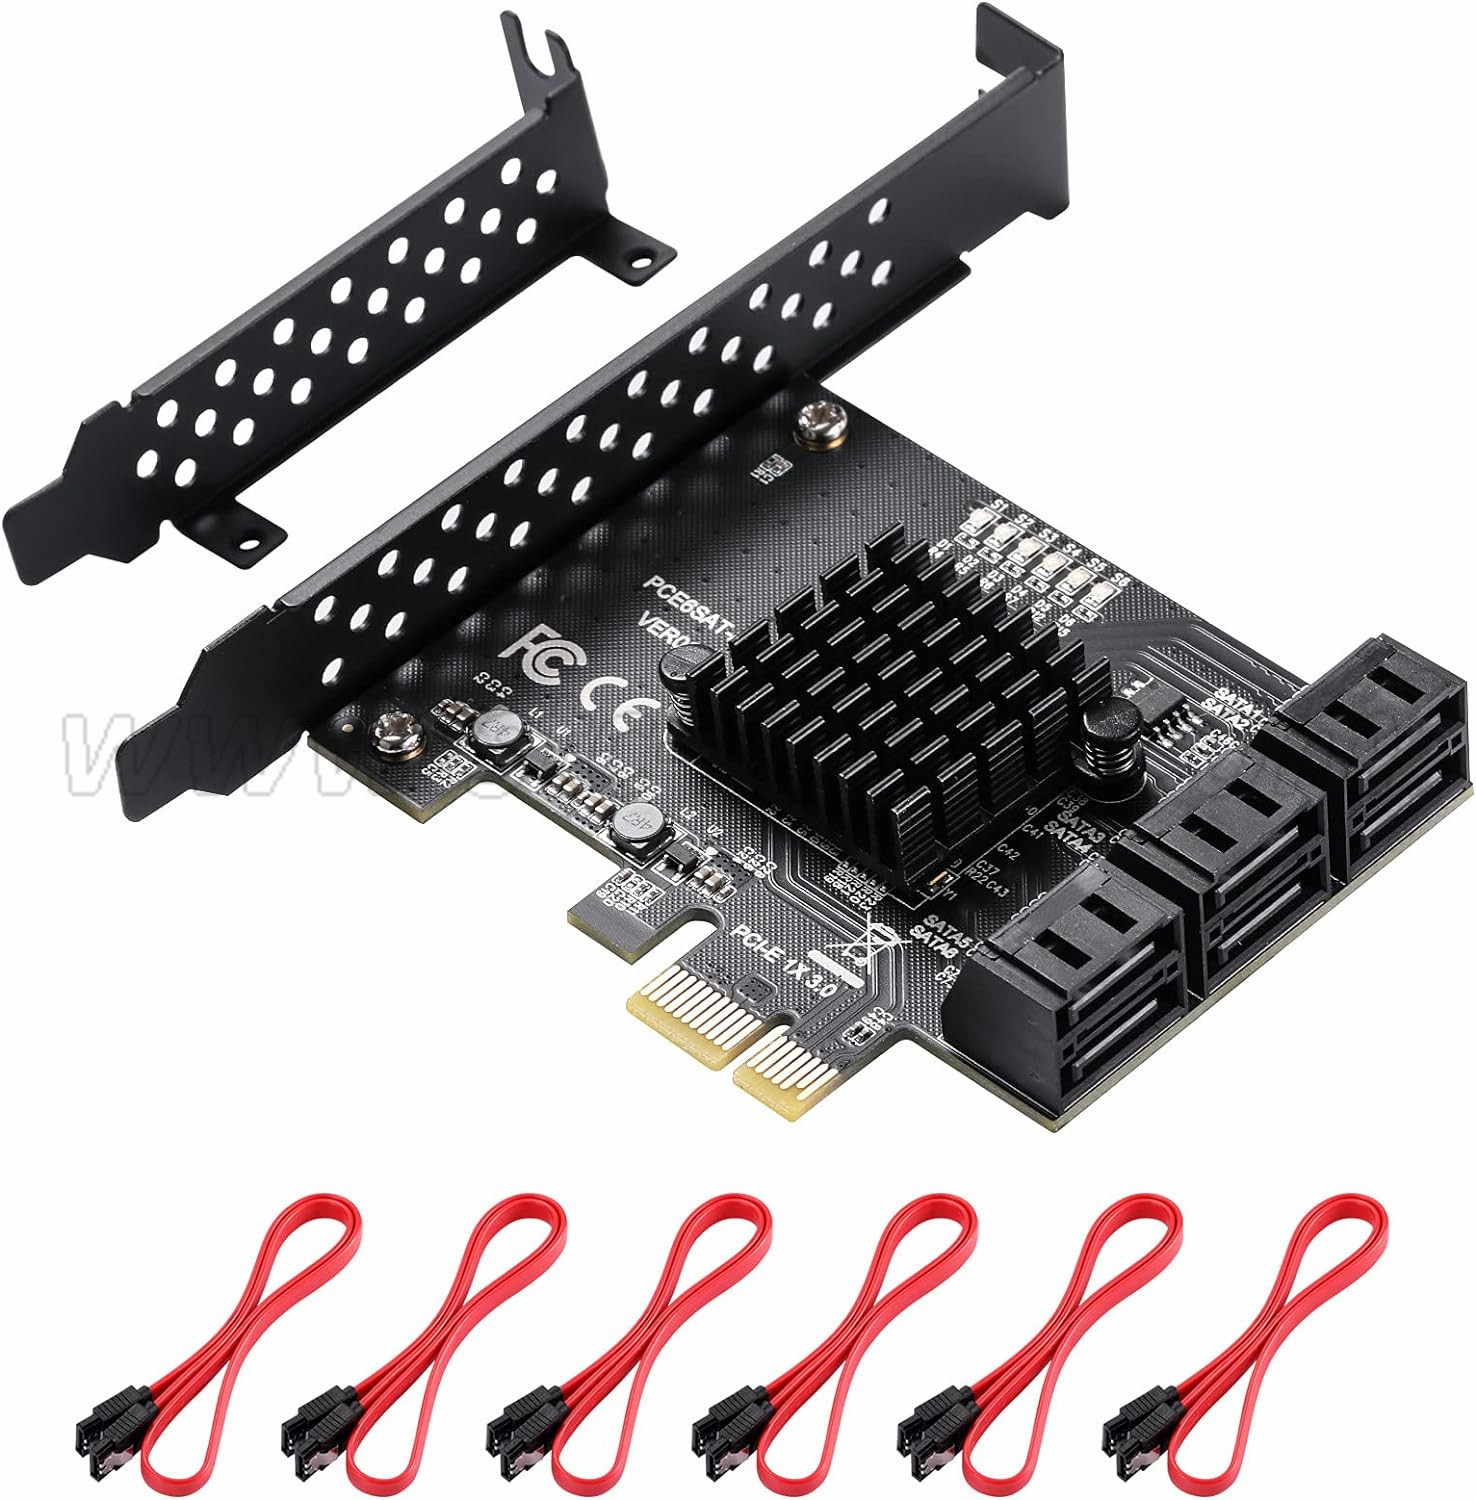 2019 High quality Linkreal Pcie 4X PCI Express to USB 3.1 Dual Type a Expansion Adapter Card Super Speed 10 Gbps with 15 Pin SATA Power Asm1142 Chipset Pcie USB 3.1 Controller